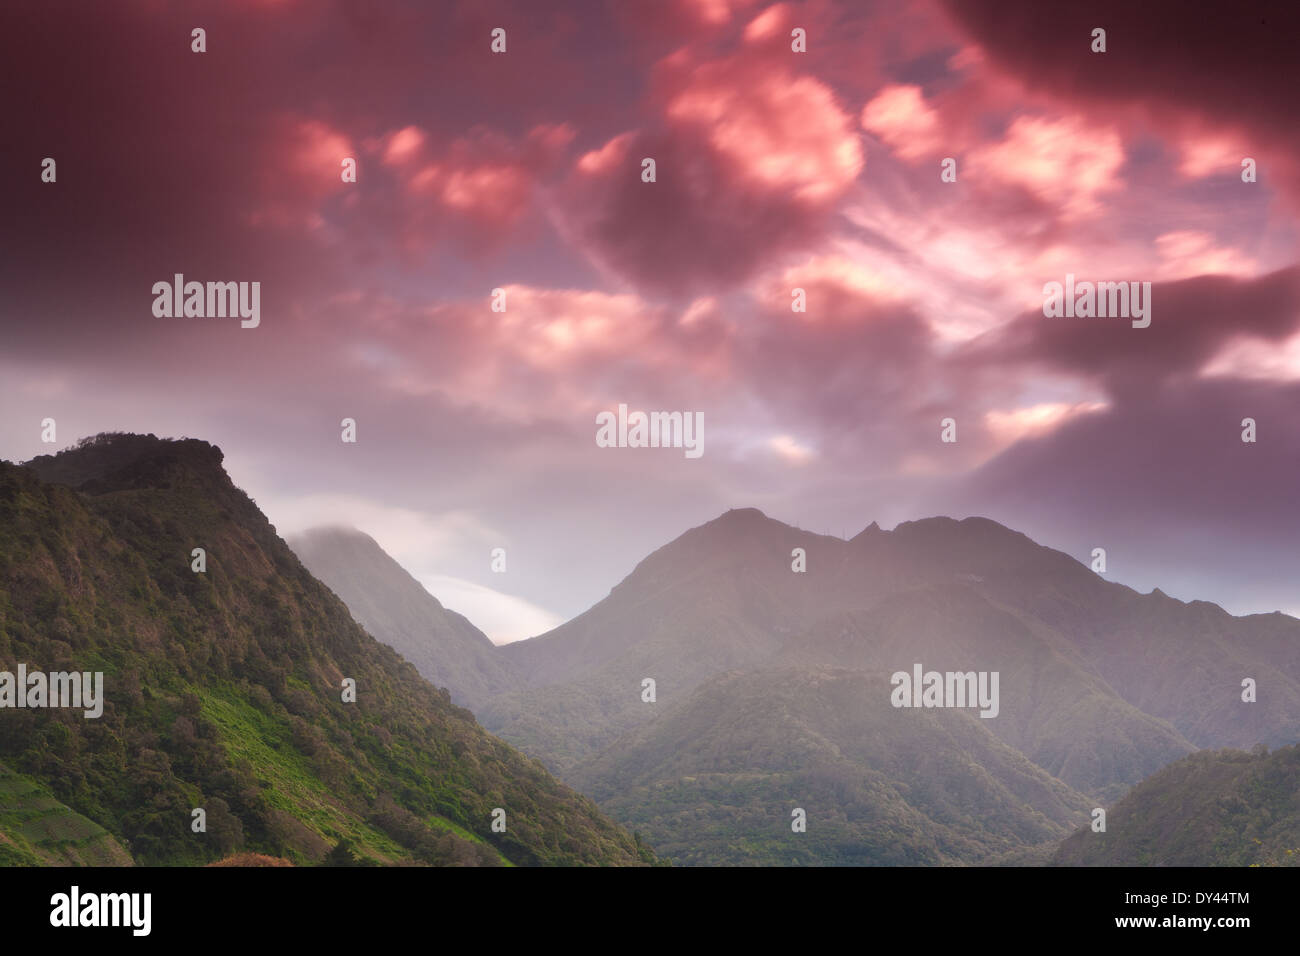 Colourful skies at sunrise and rainfall over Volcan Baru, 3475 m, in the Volcan Baru national park, Chiriqui province, Republic of Panama. Stock Photo